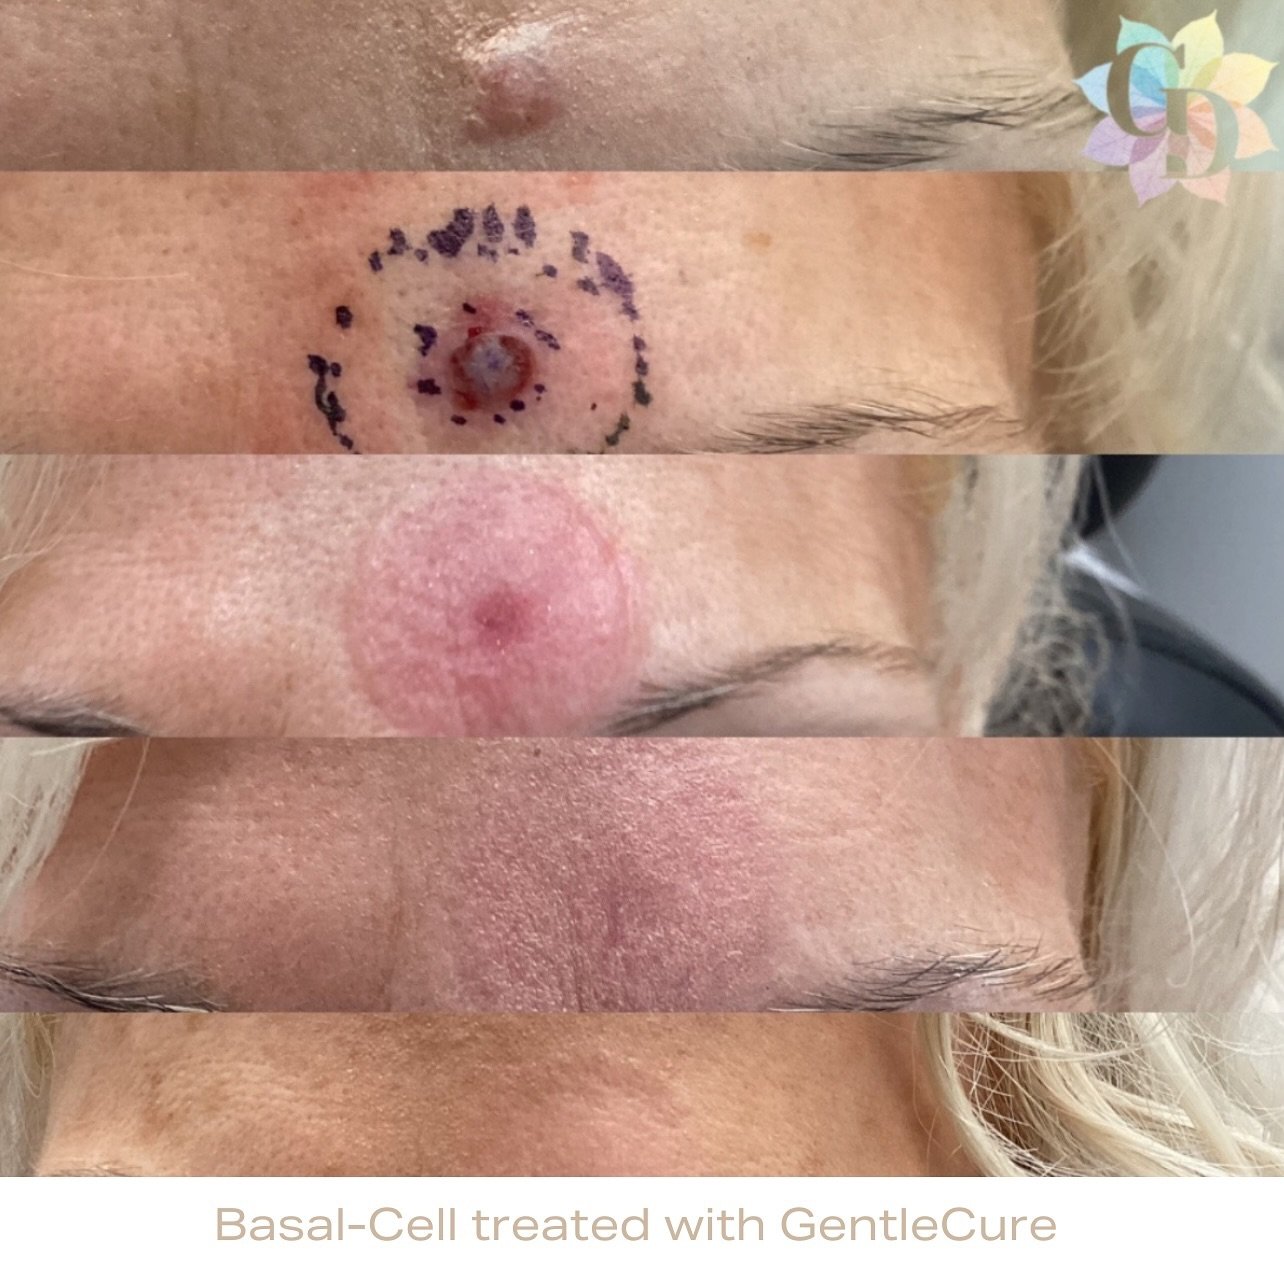 Our patients love @gentlecureigsrt because it is a non-surgical alternative for Basal-Cells &amp; Squamous Cells! 

This innovative technology is the first and only radiation treatment for skin cancer that uses ultrasound images. The ultrasound image